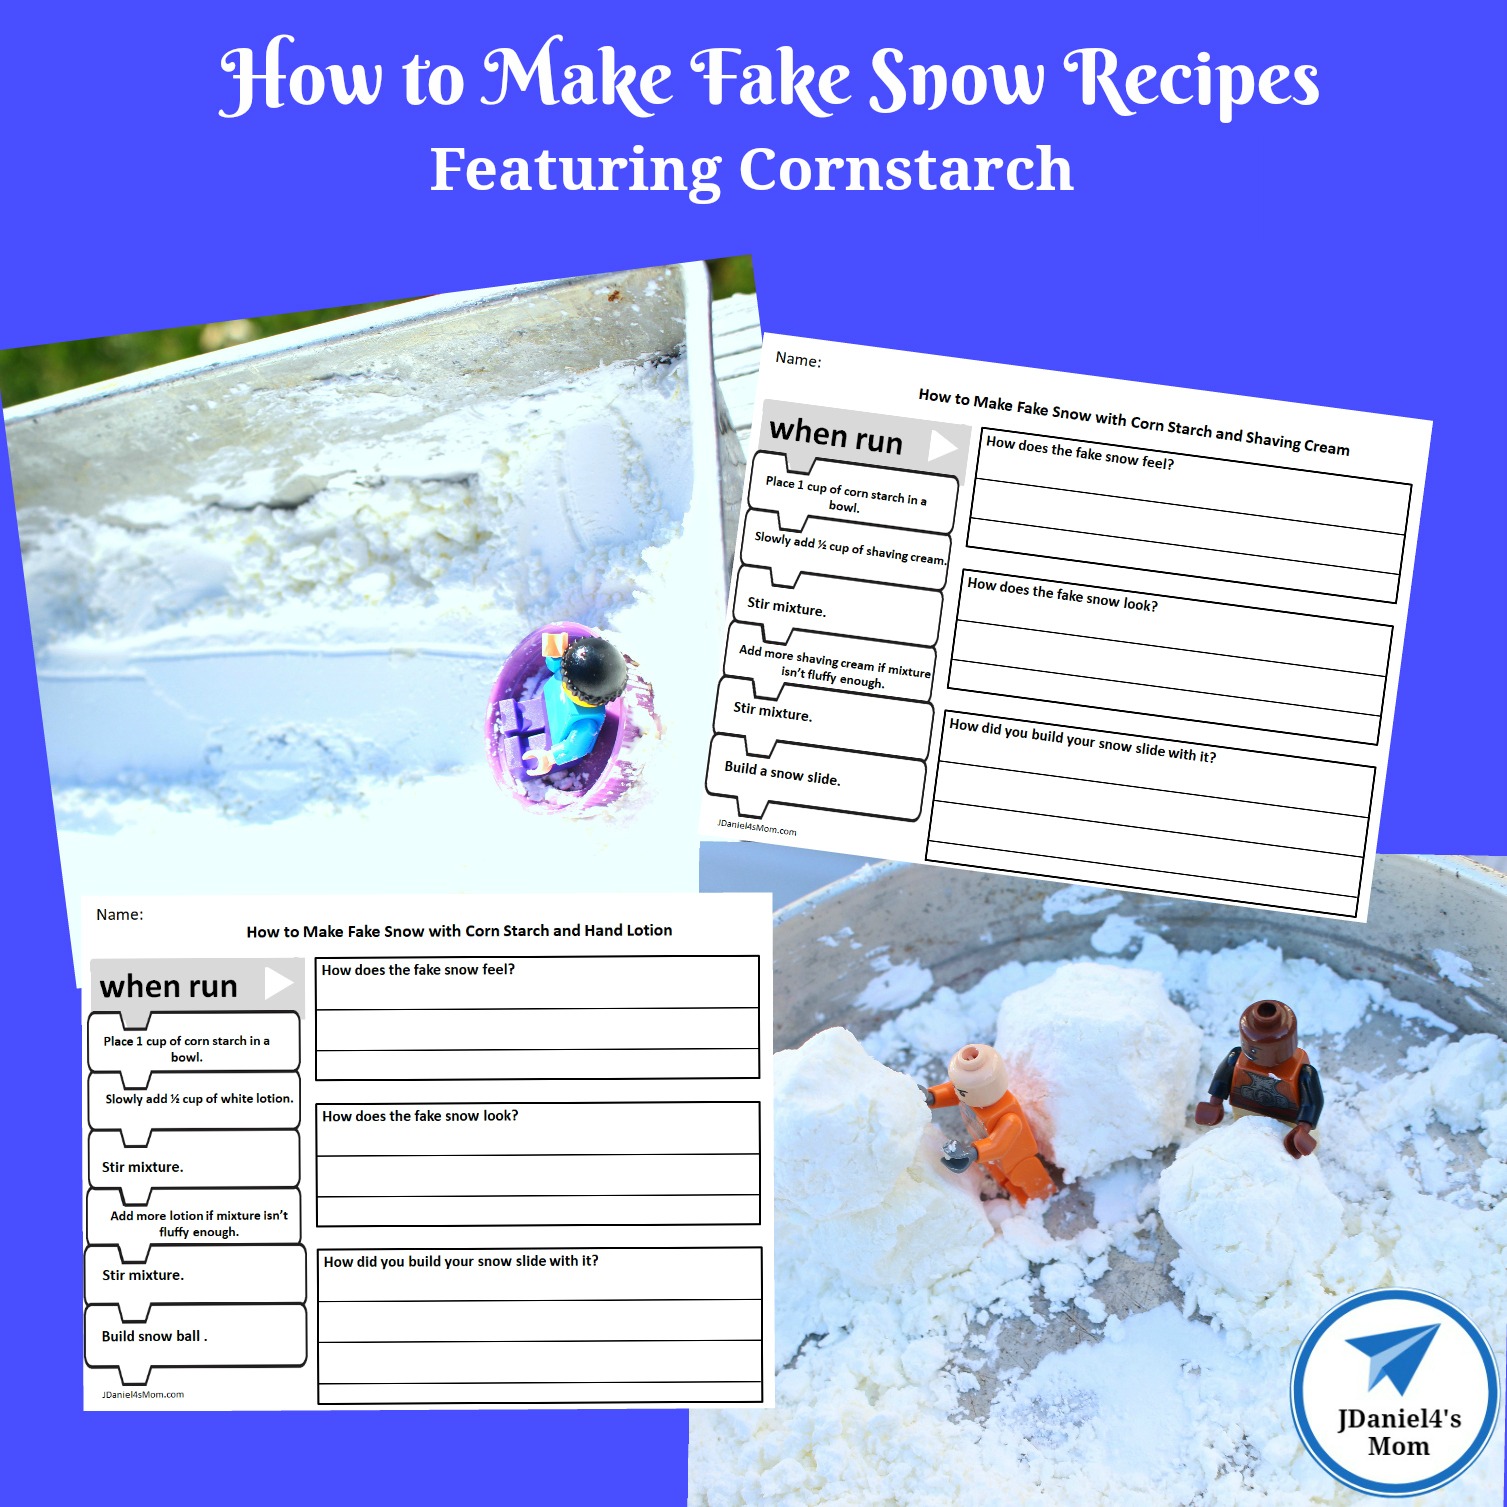 How to Make Fake Snow Recipes Featuring Cornstarch Displayed on Blockly Blocks.